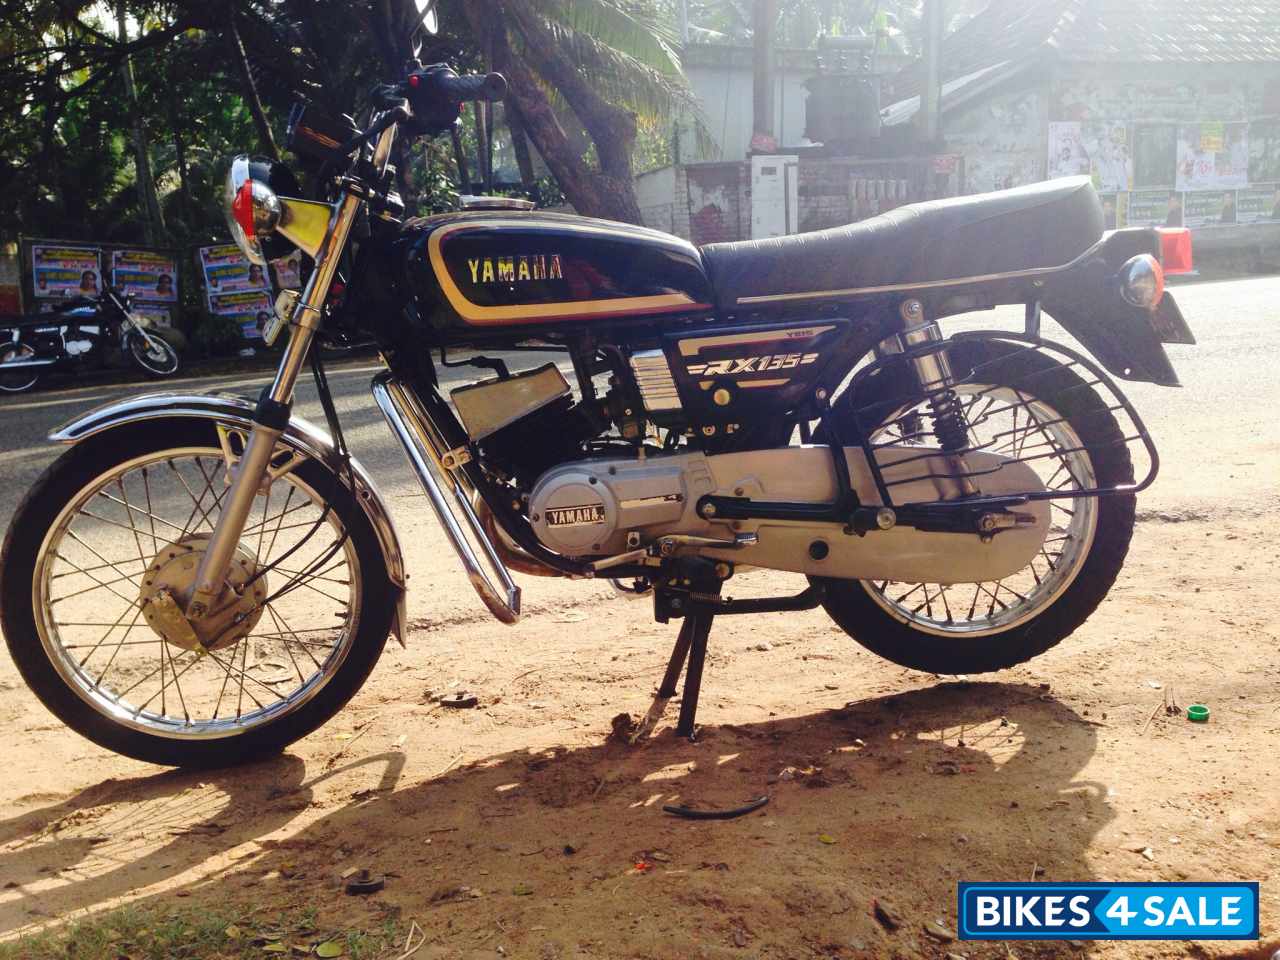 Used 1998 model Yamaha RX 135 for sale in Trivandrum. ID ...